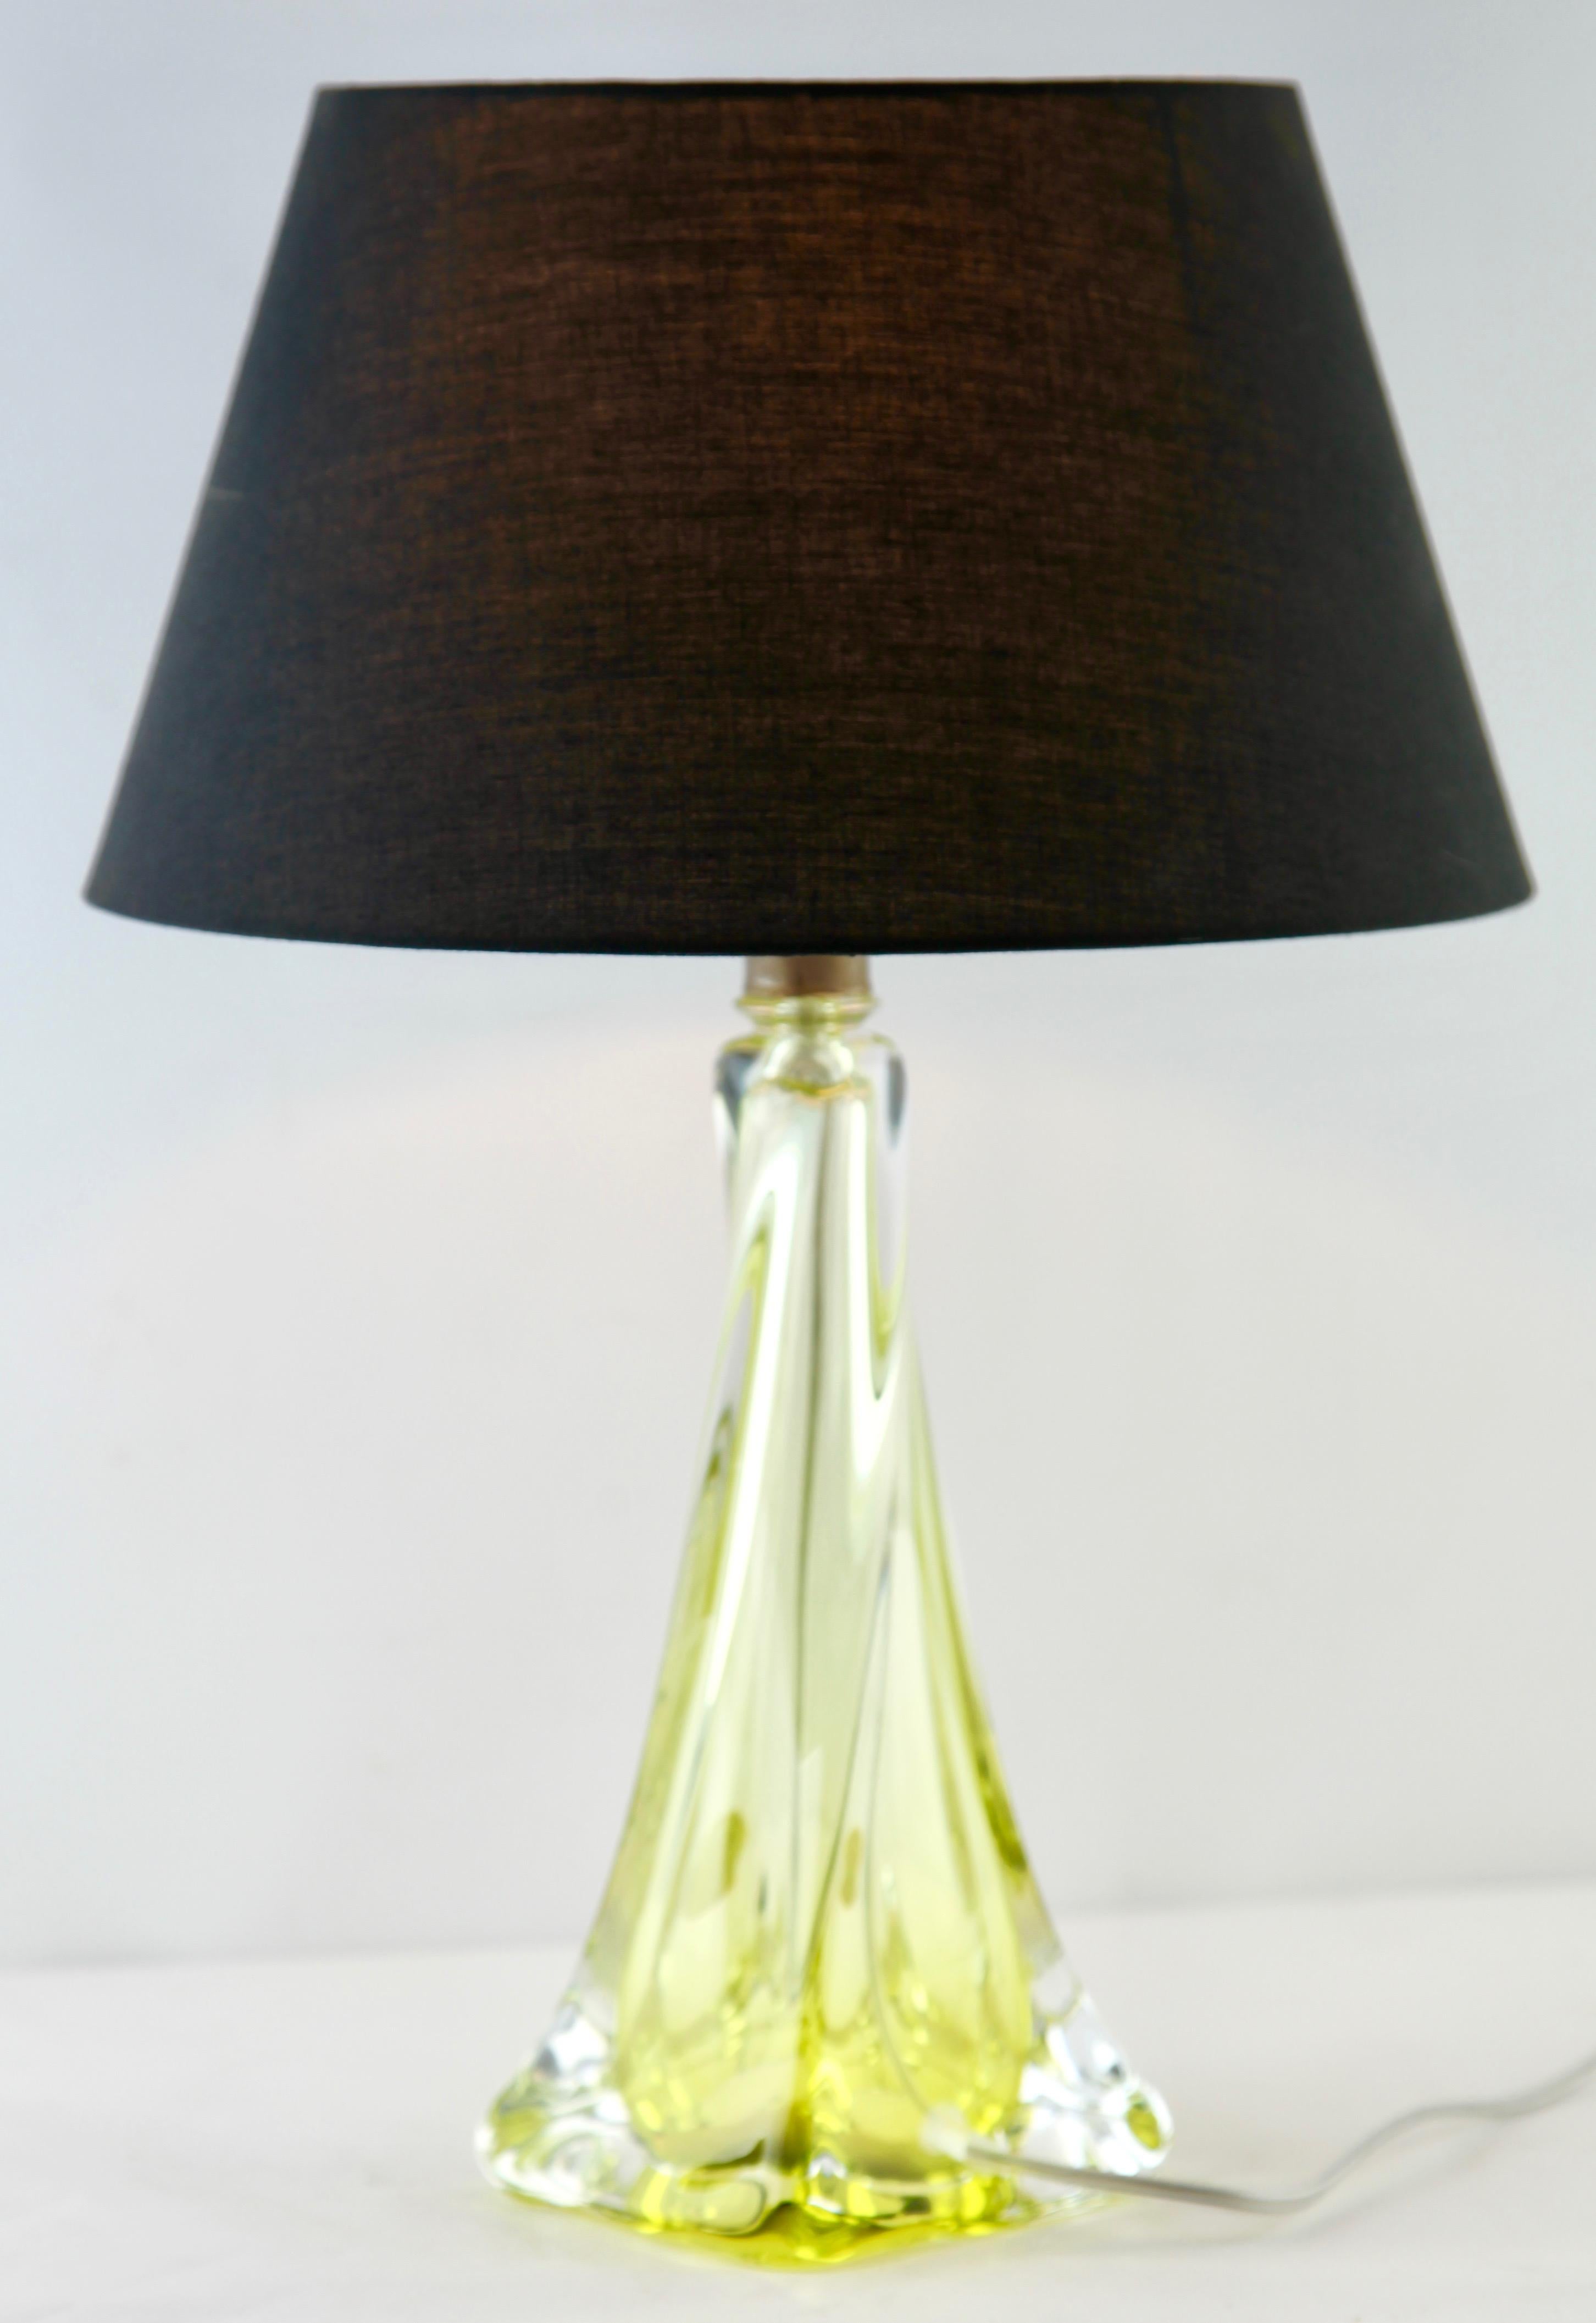 This simple yet graceful table lamp is in large size; 15 inches excluding the lamp-fitting and shade.
The colored core in Classic Val Saint Lambert tint, has been given a thick Sommerso (clear crystal casing) so that the object appears delicate